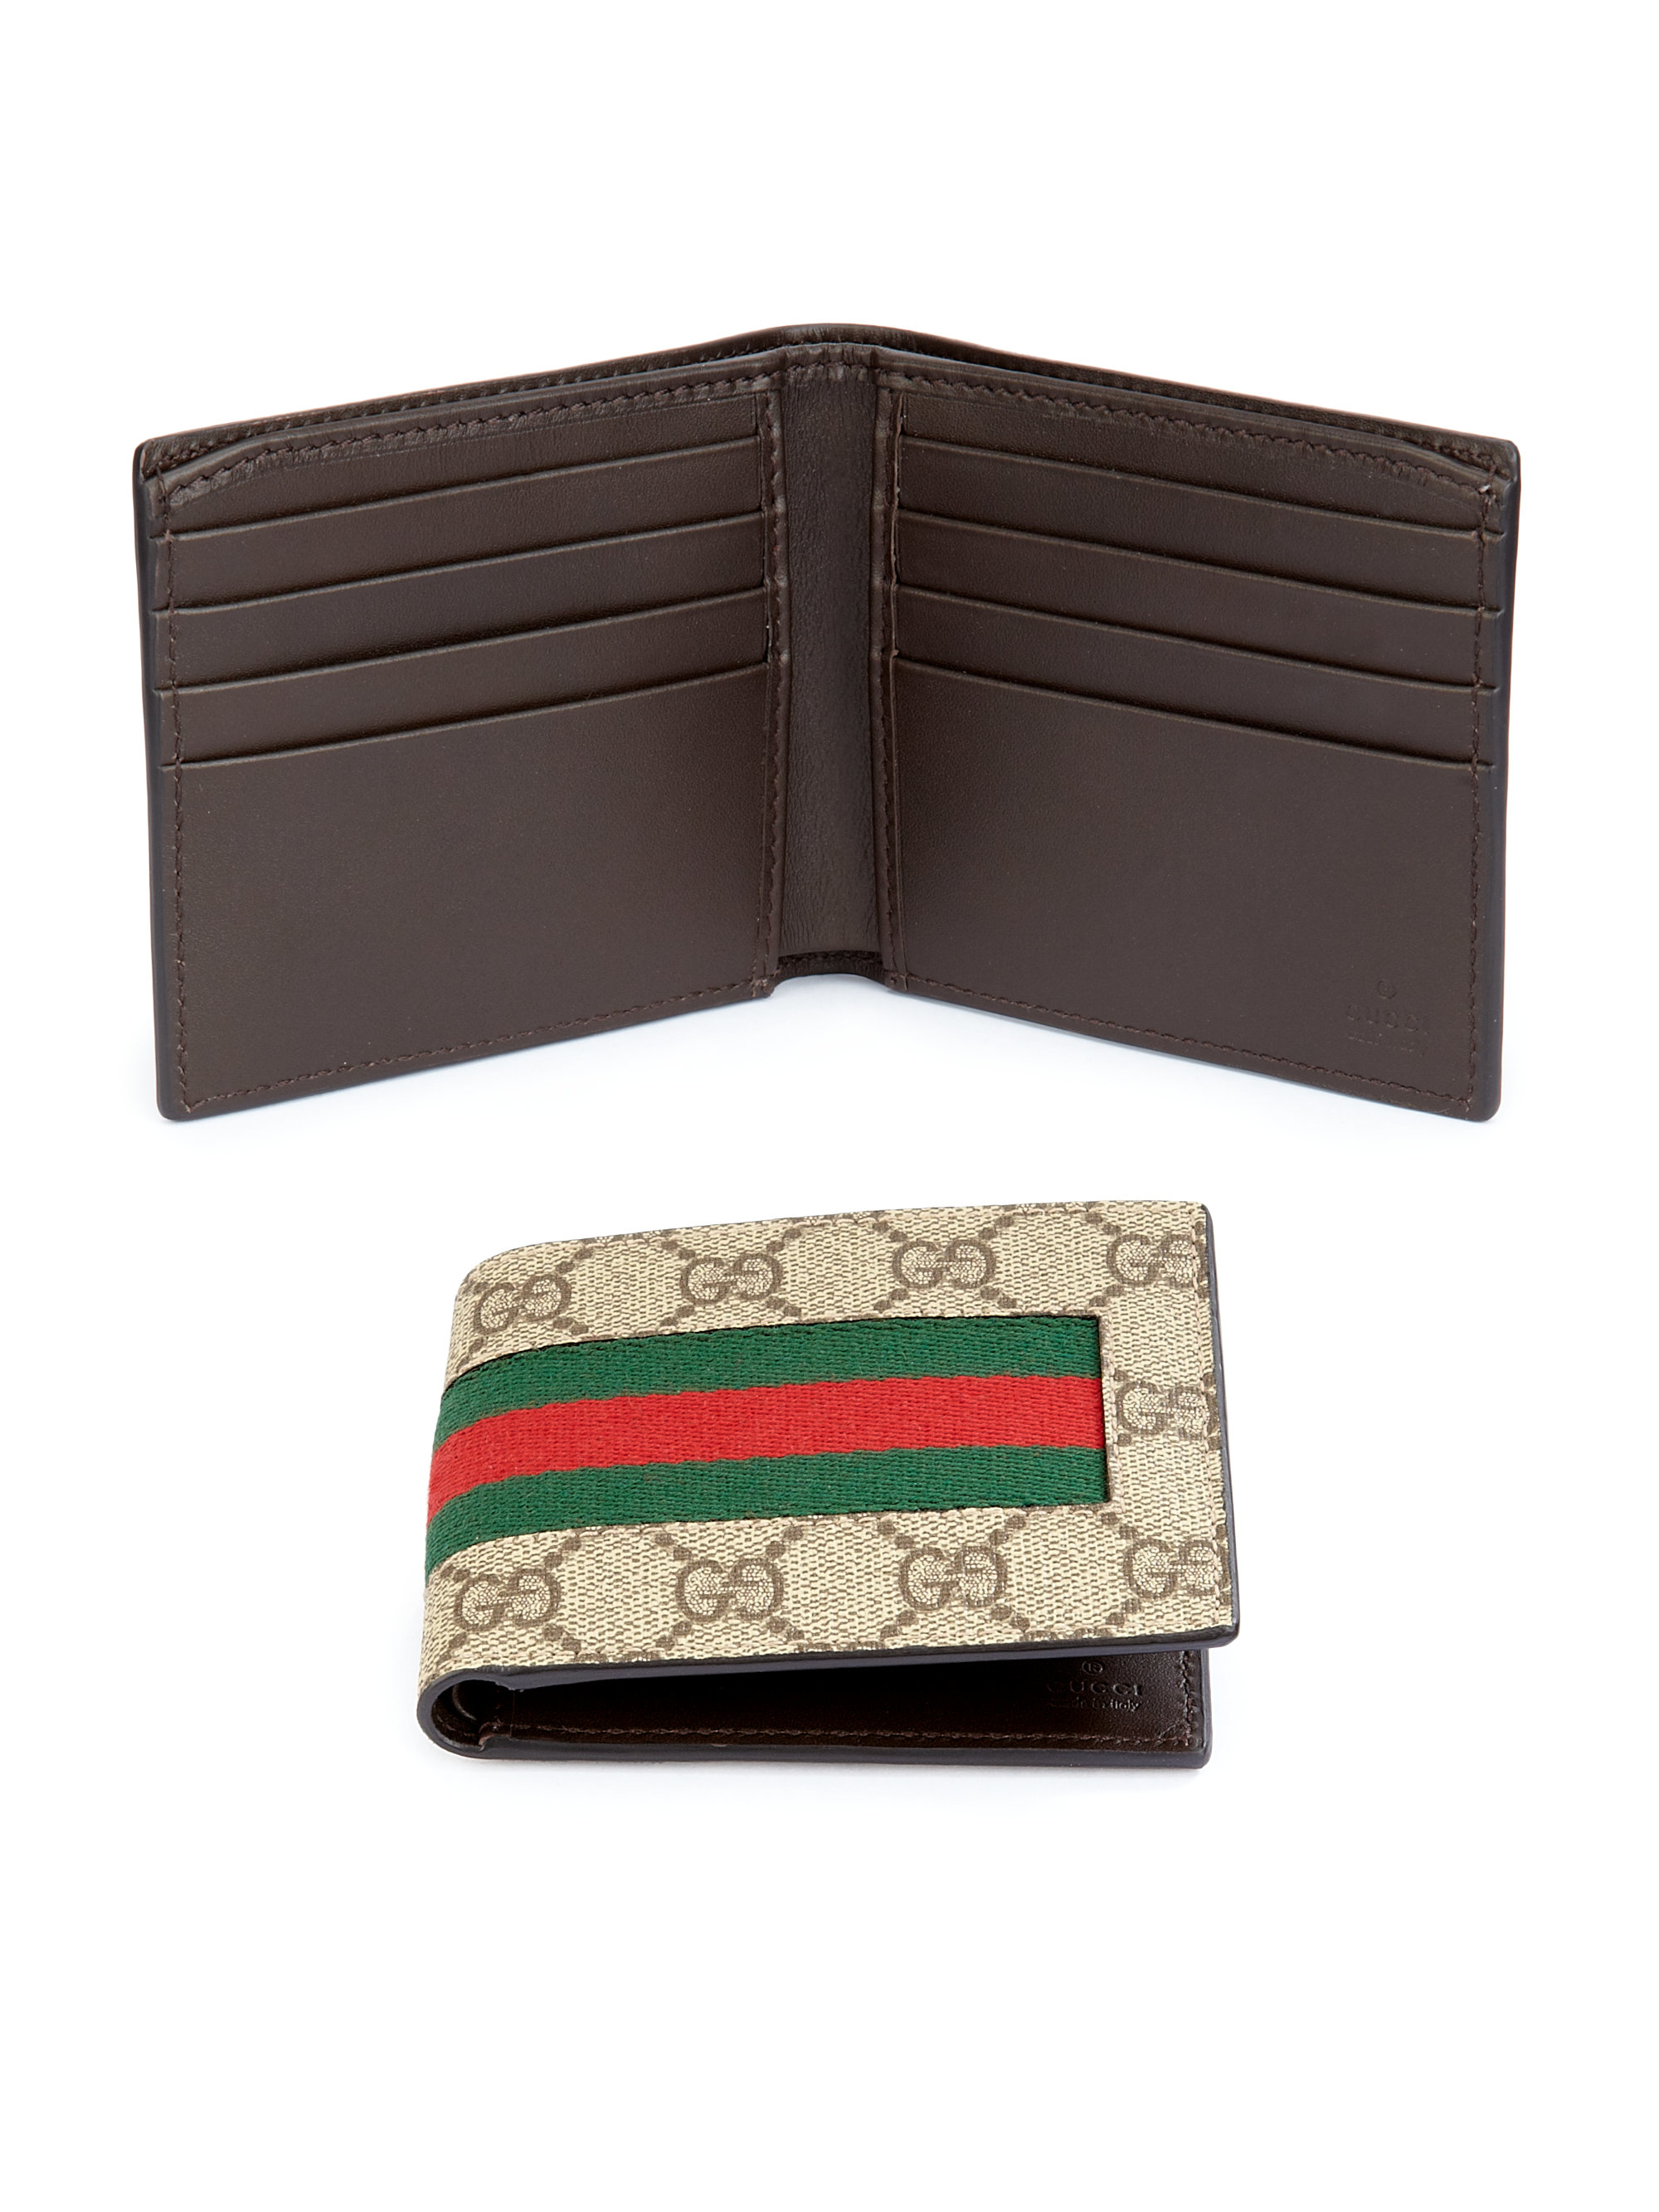 Gucci Gg Supreme Canvas Web Bifold Wallet in Green for Men ...